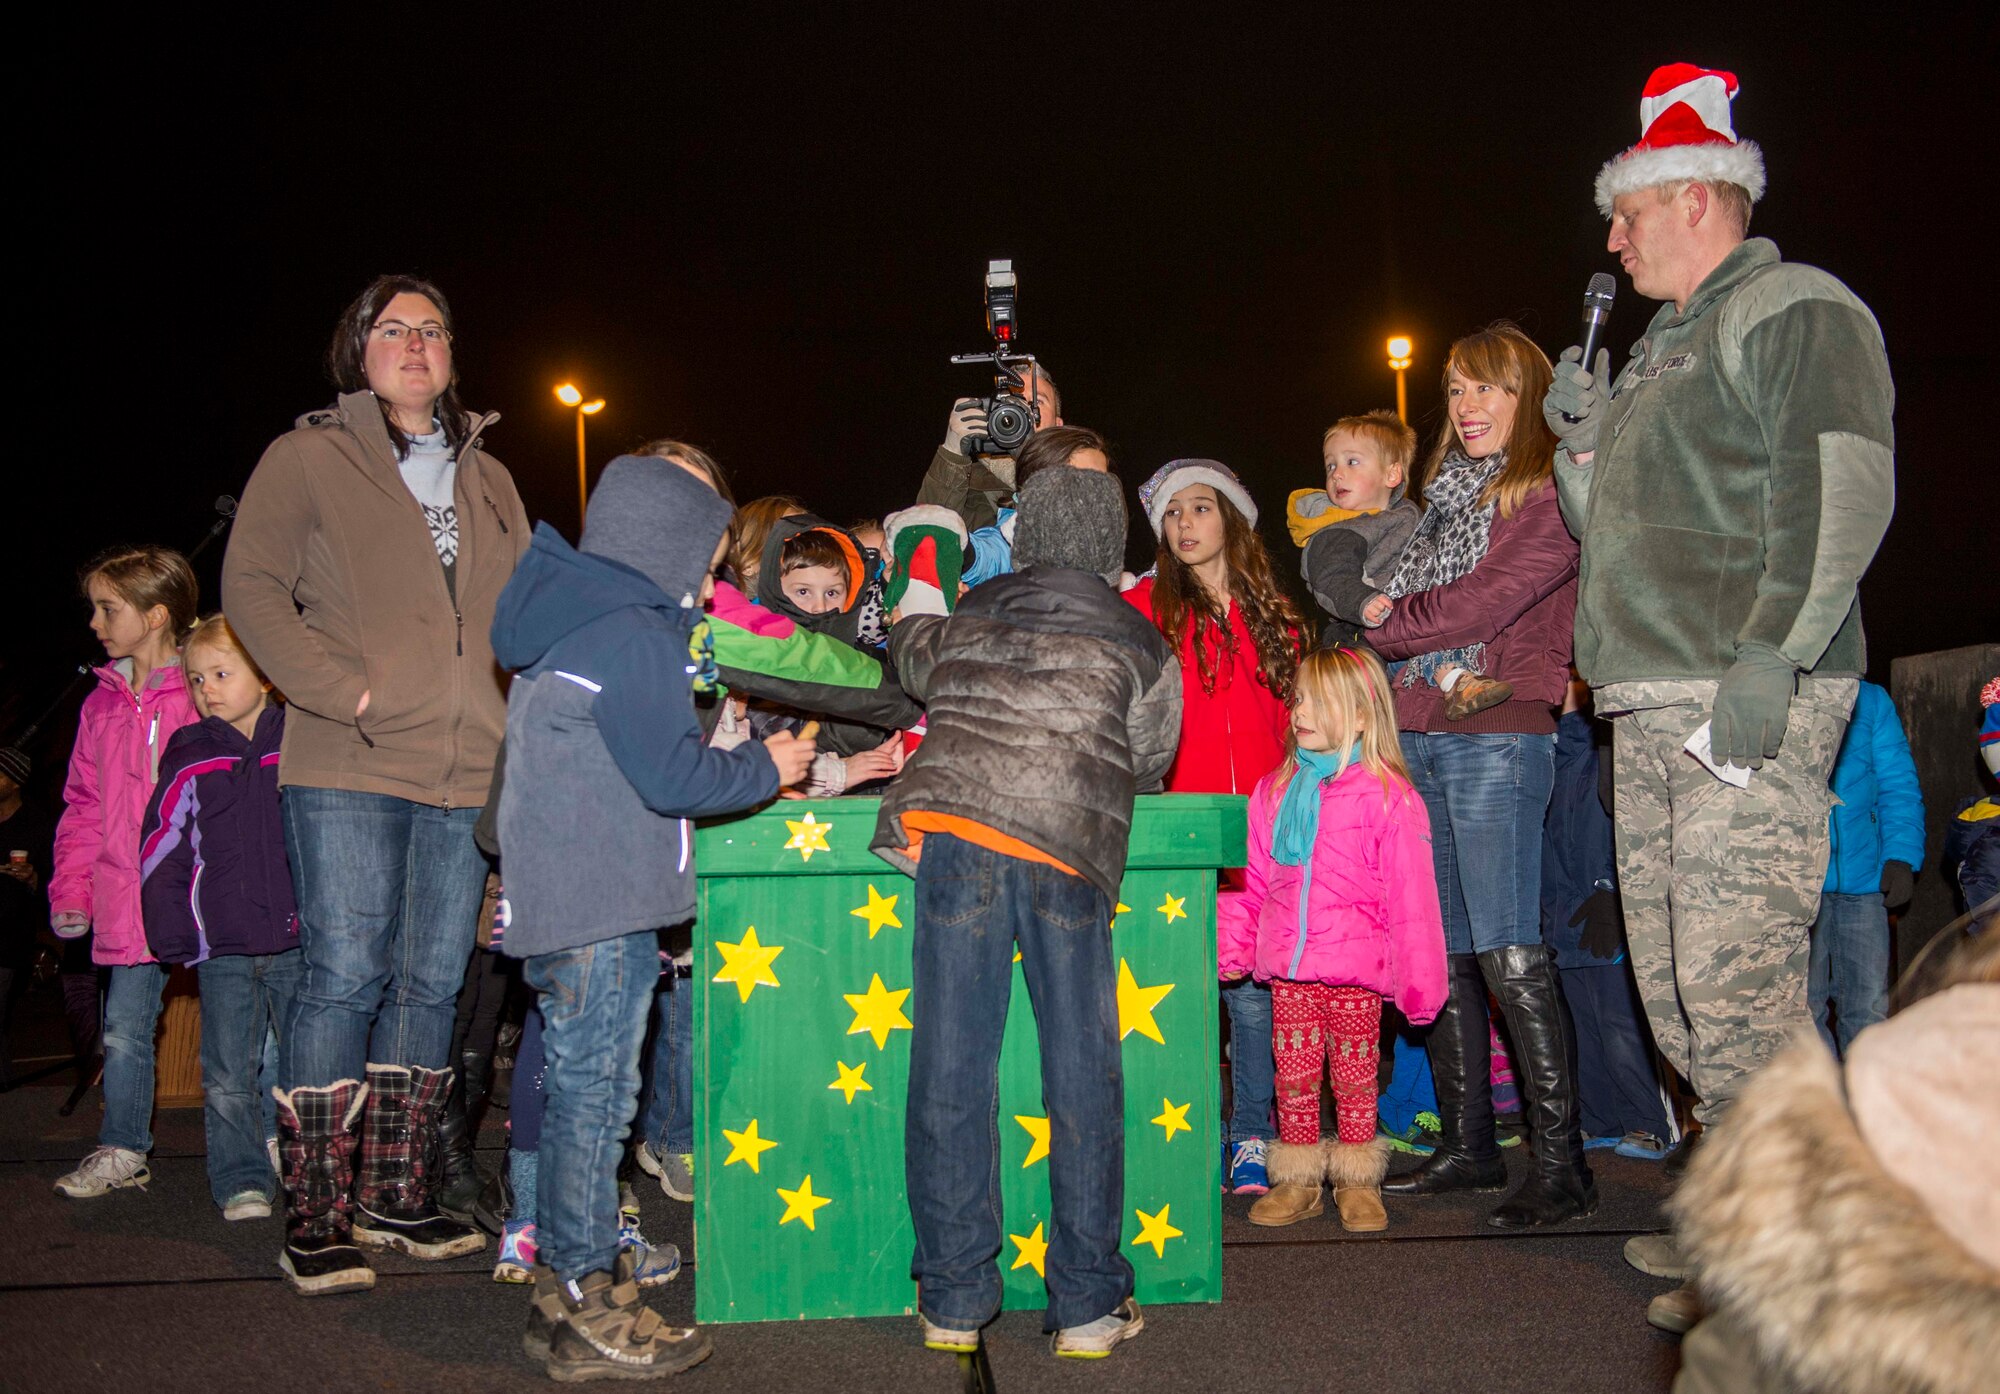 U.S. Air Force Col. Joe McFall, 52nd Fighter Wing commander, and the family members of deployed Spangdahlem Airmen turn on the Holiday Tree lights together during the annual tree-lighting ceremony at the Bowling Alley at Spangdahlem Air Base, Germany, Dec. 10, 2015. McFall invited family members of deployed Spangdahlem Airmen to light the tree together to officially signal the beginning of the holiday season. (U.S. Air Force photo by Airman 1st Class Timothy Kim/Released)